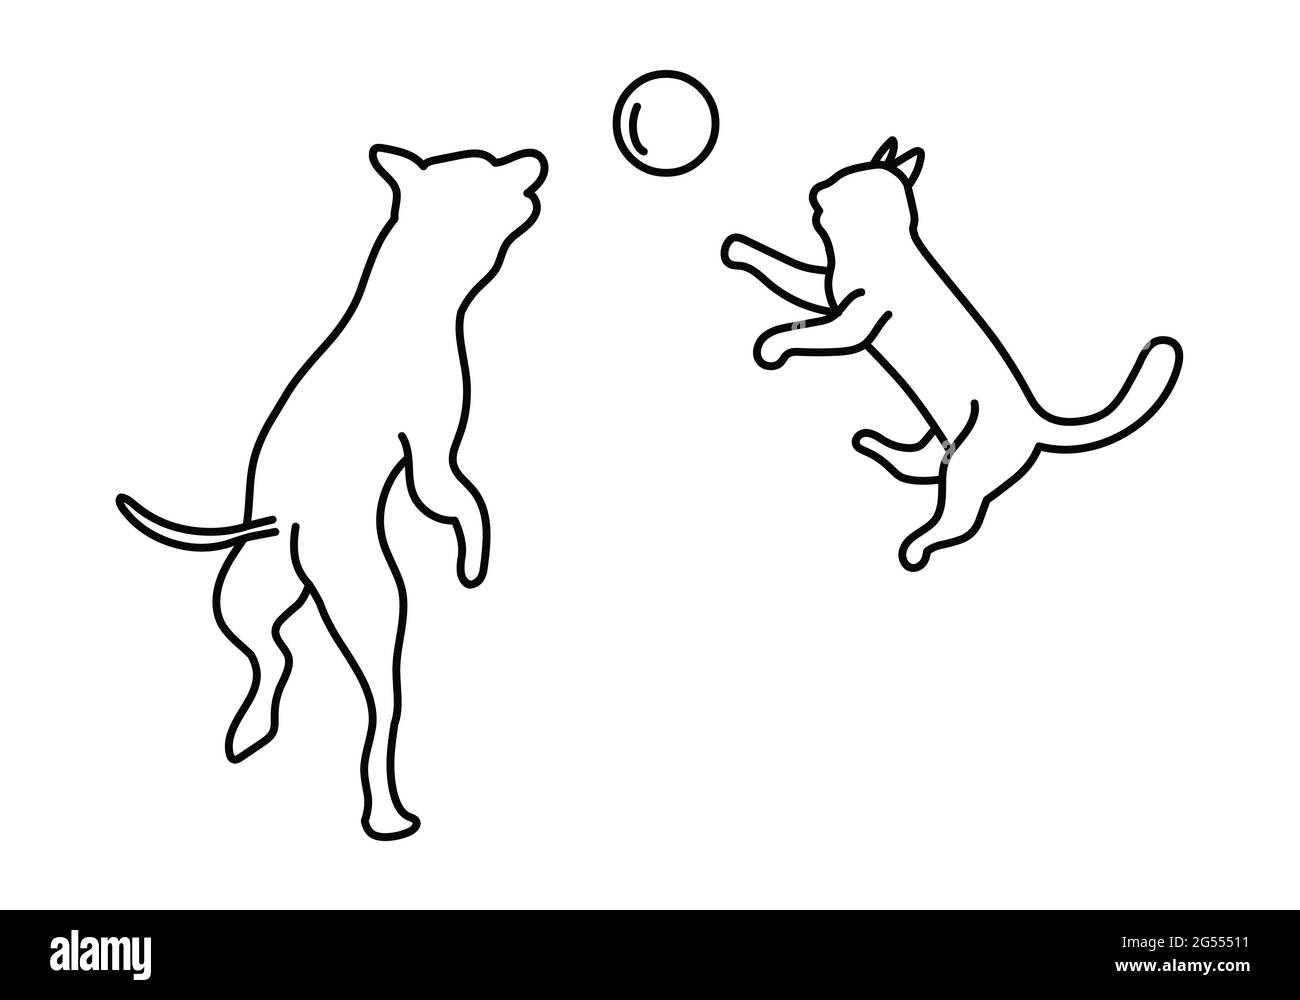 Cat and dog playing line drawing, pets animal illustration Stock Vector